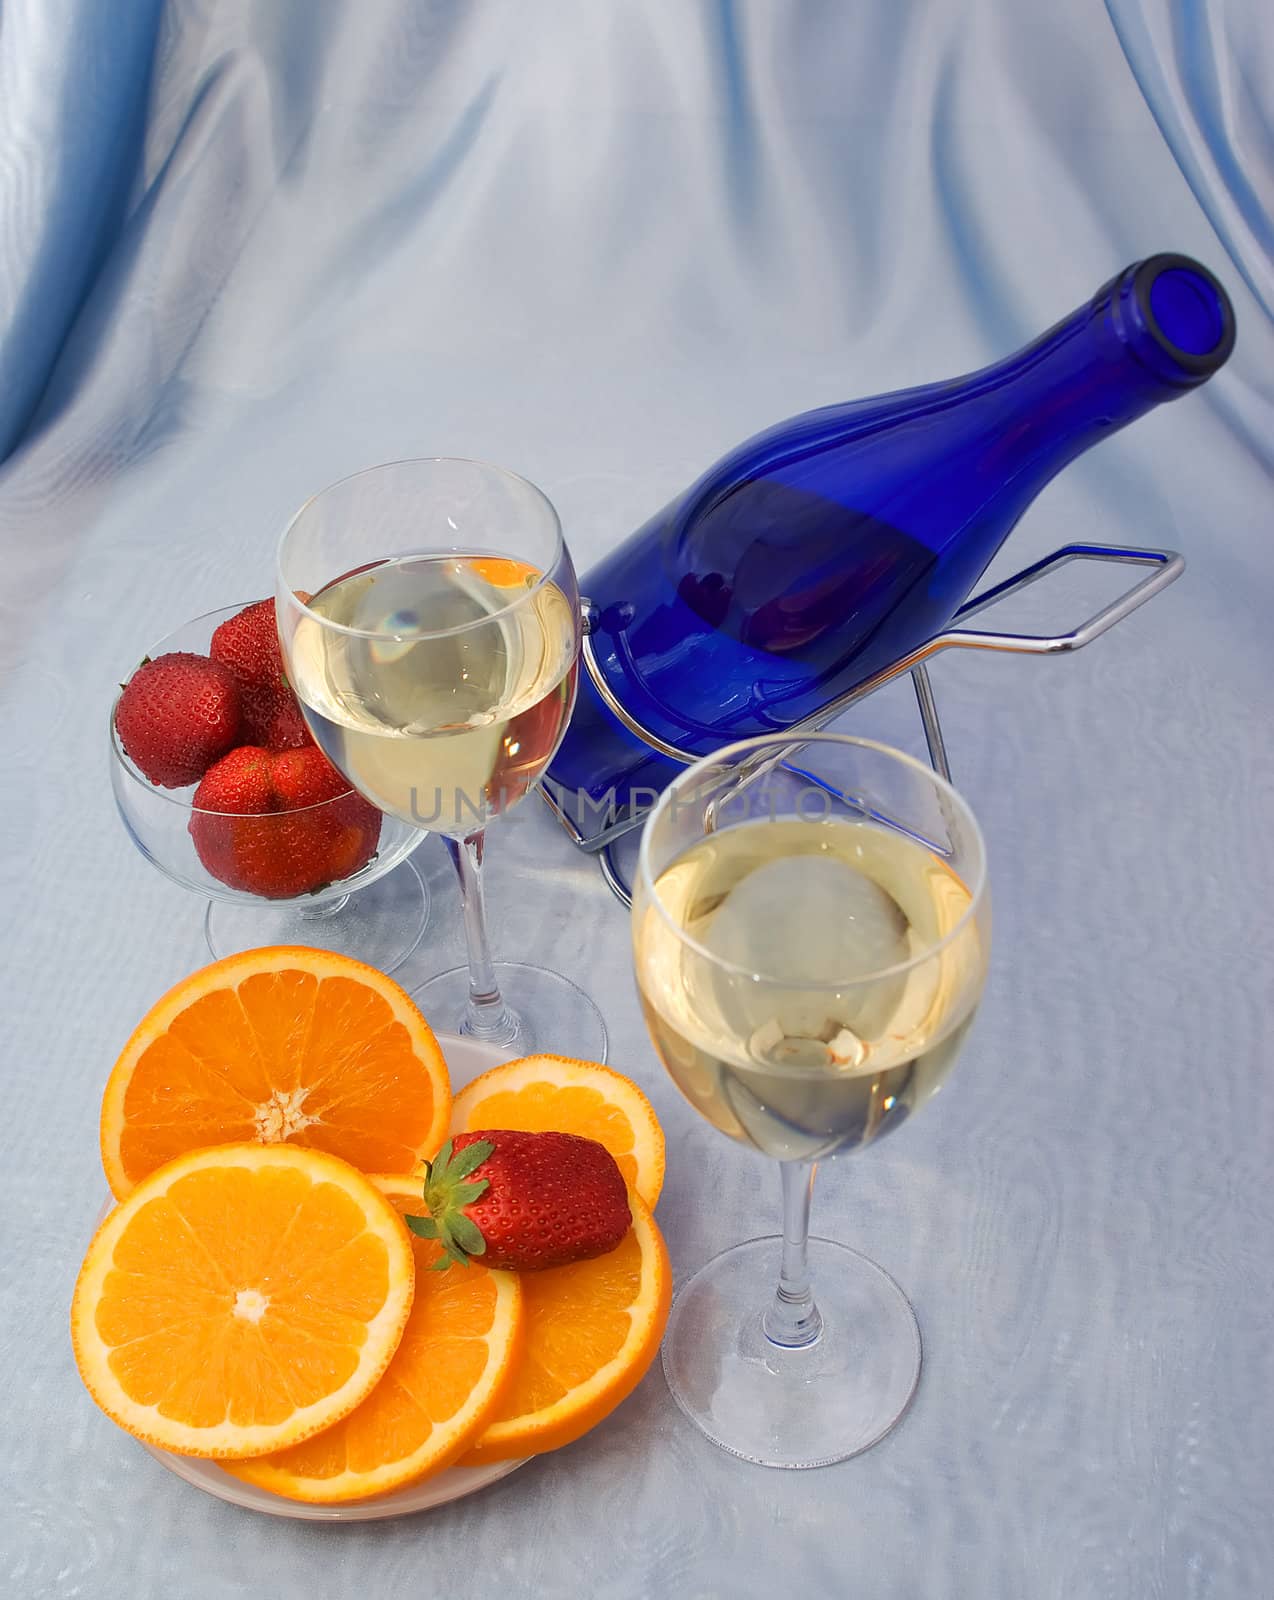 Glasses of wine with oranges and strawberry